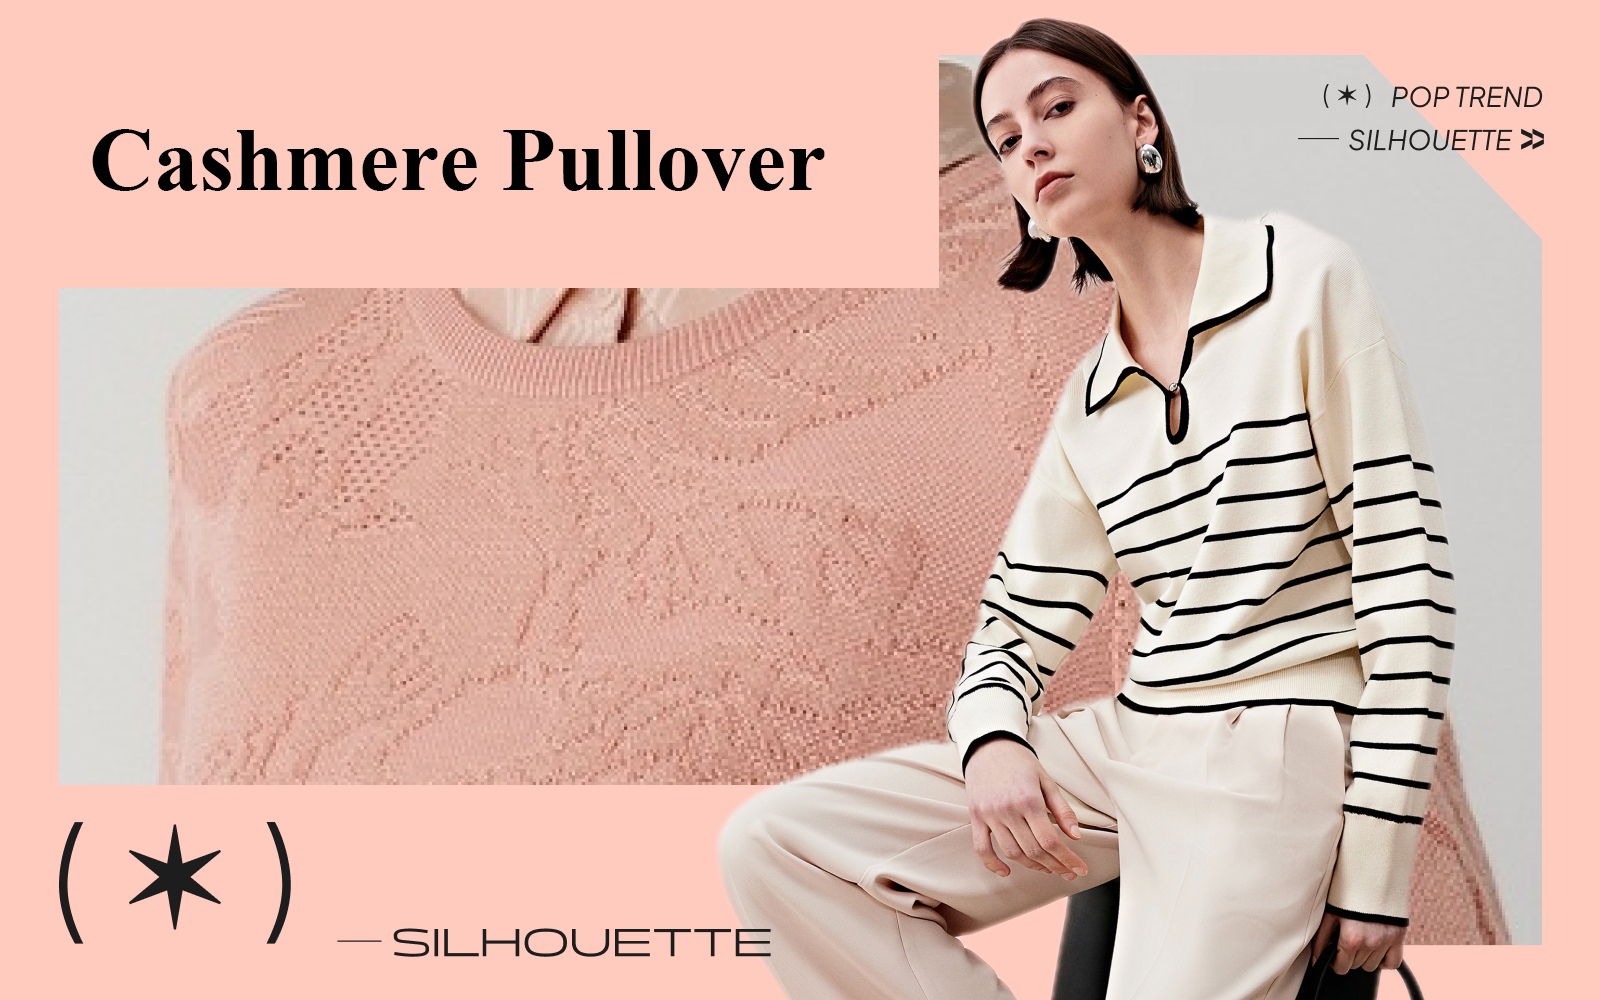 Cashmere Pullover -- The Silhouette Trend for Women's Knitwear